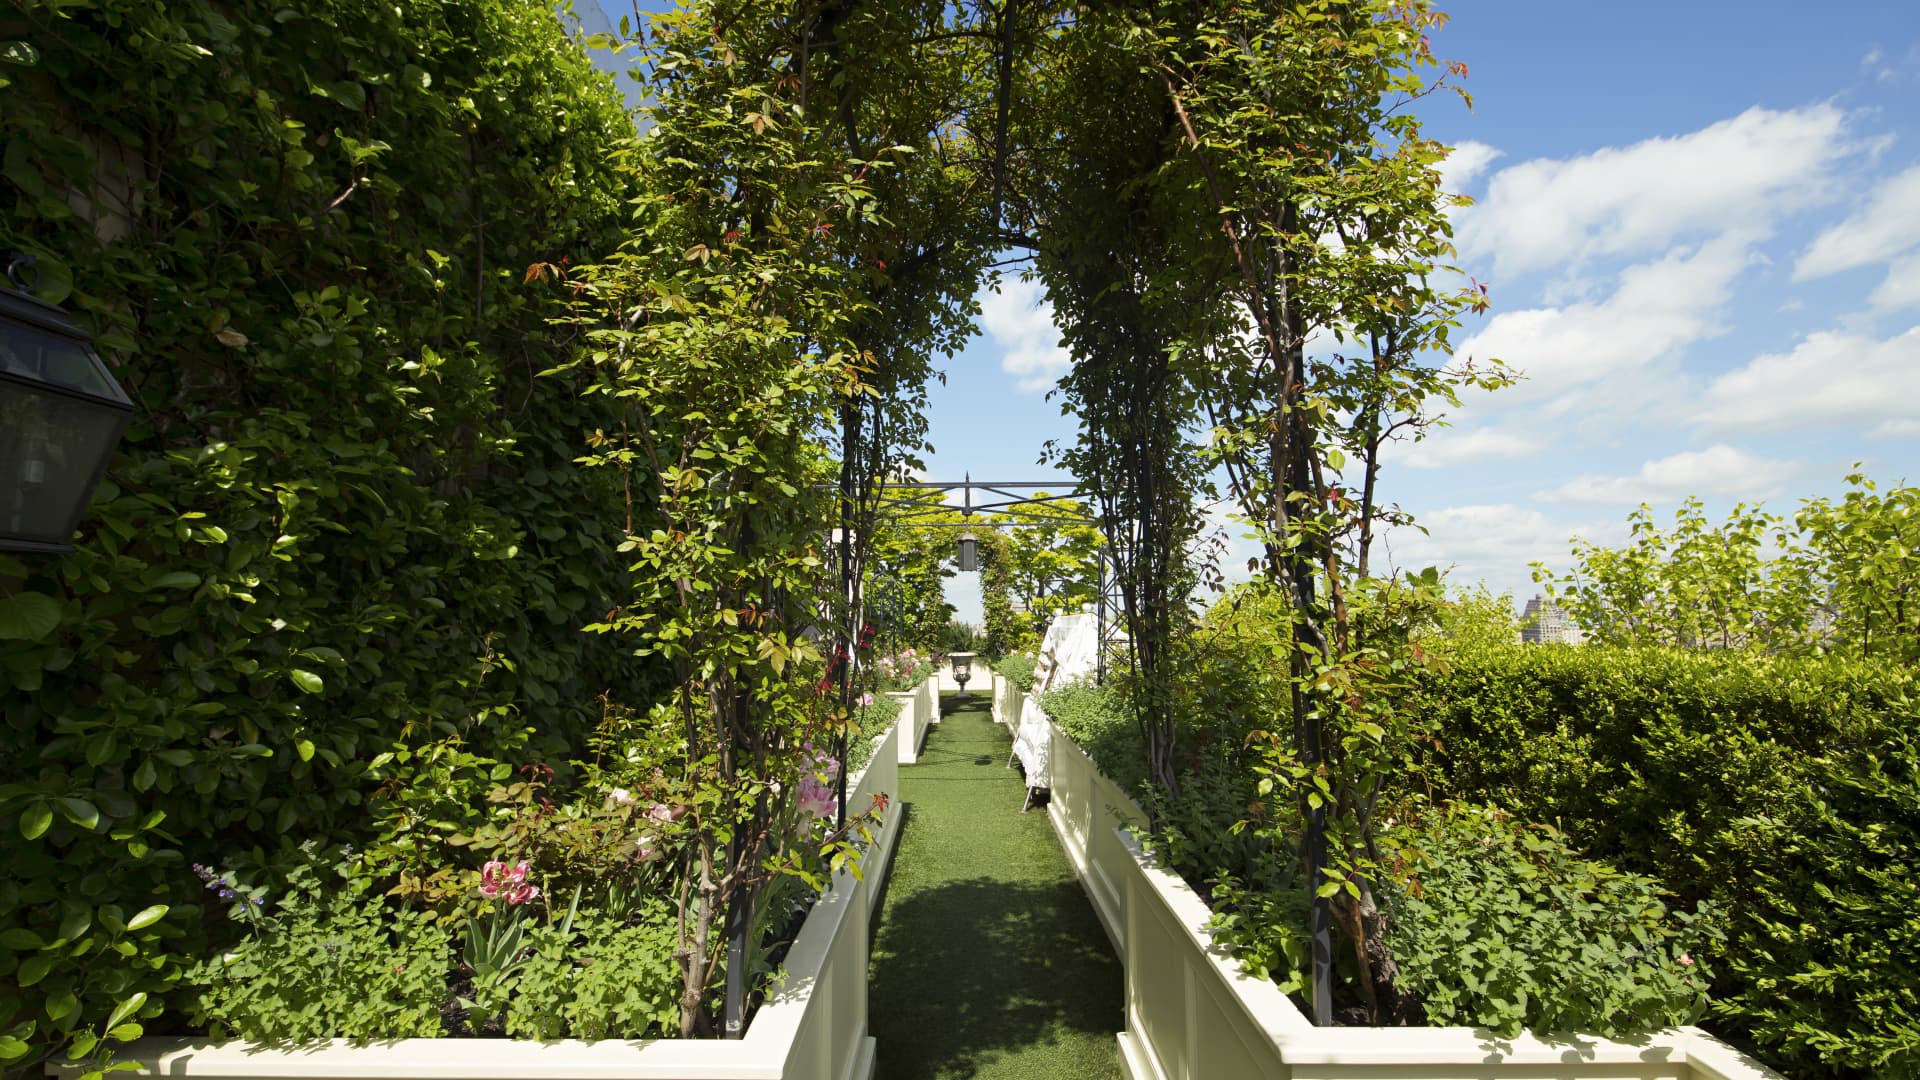 Landscape architect Madison Cox designed the home's outdoor gardens.